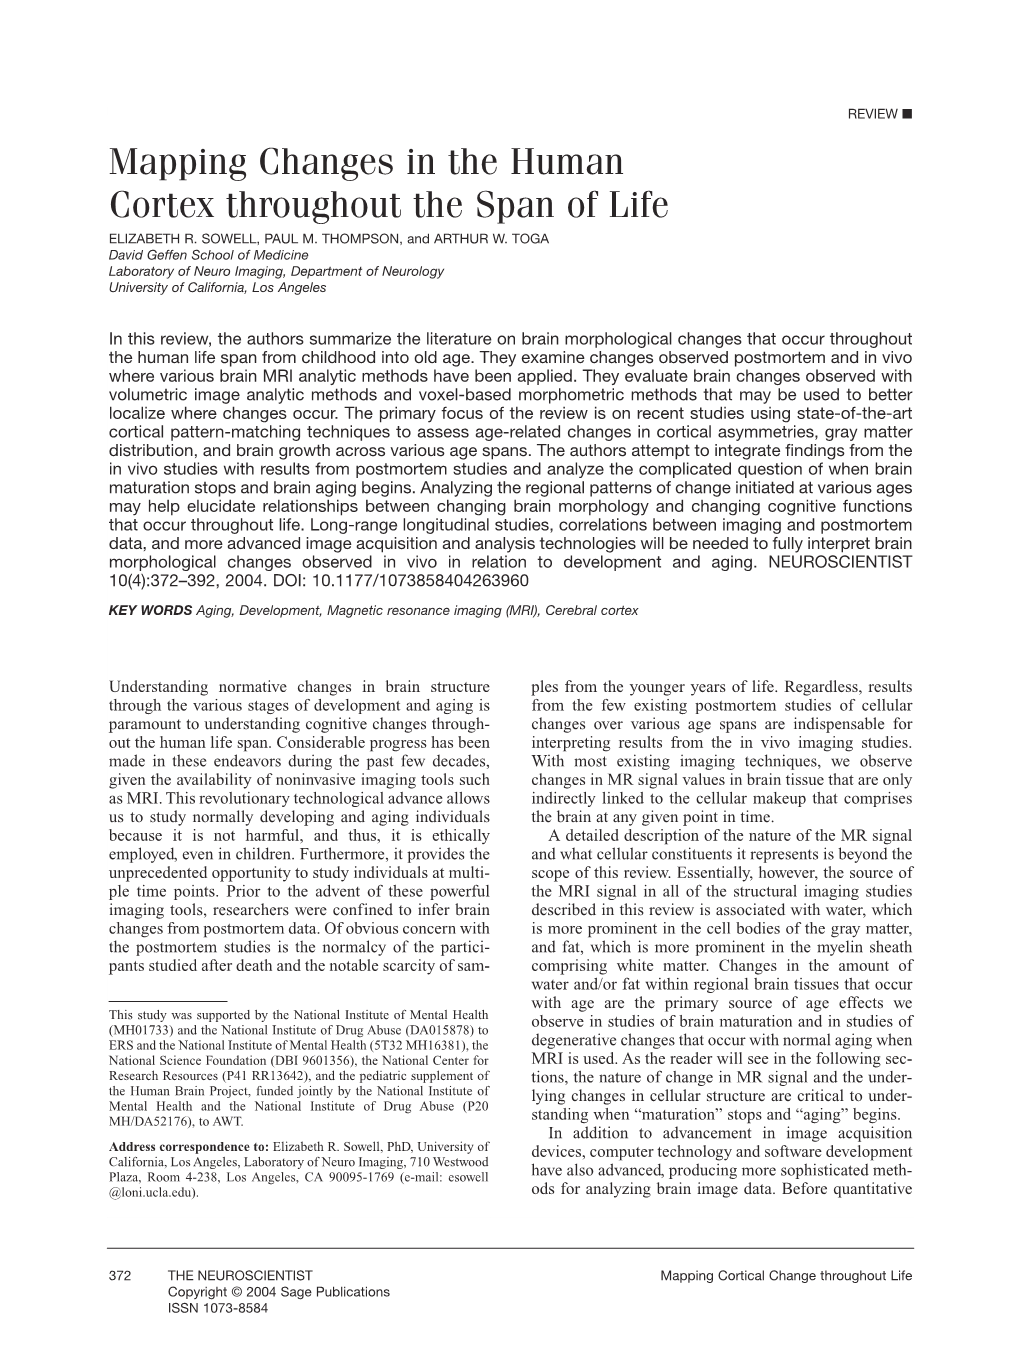 Mapping Changes in the Human Cortex Throughout the Span of Life ELIZABETH R